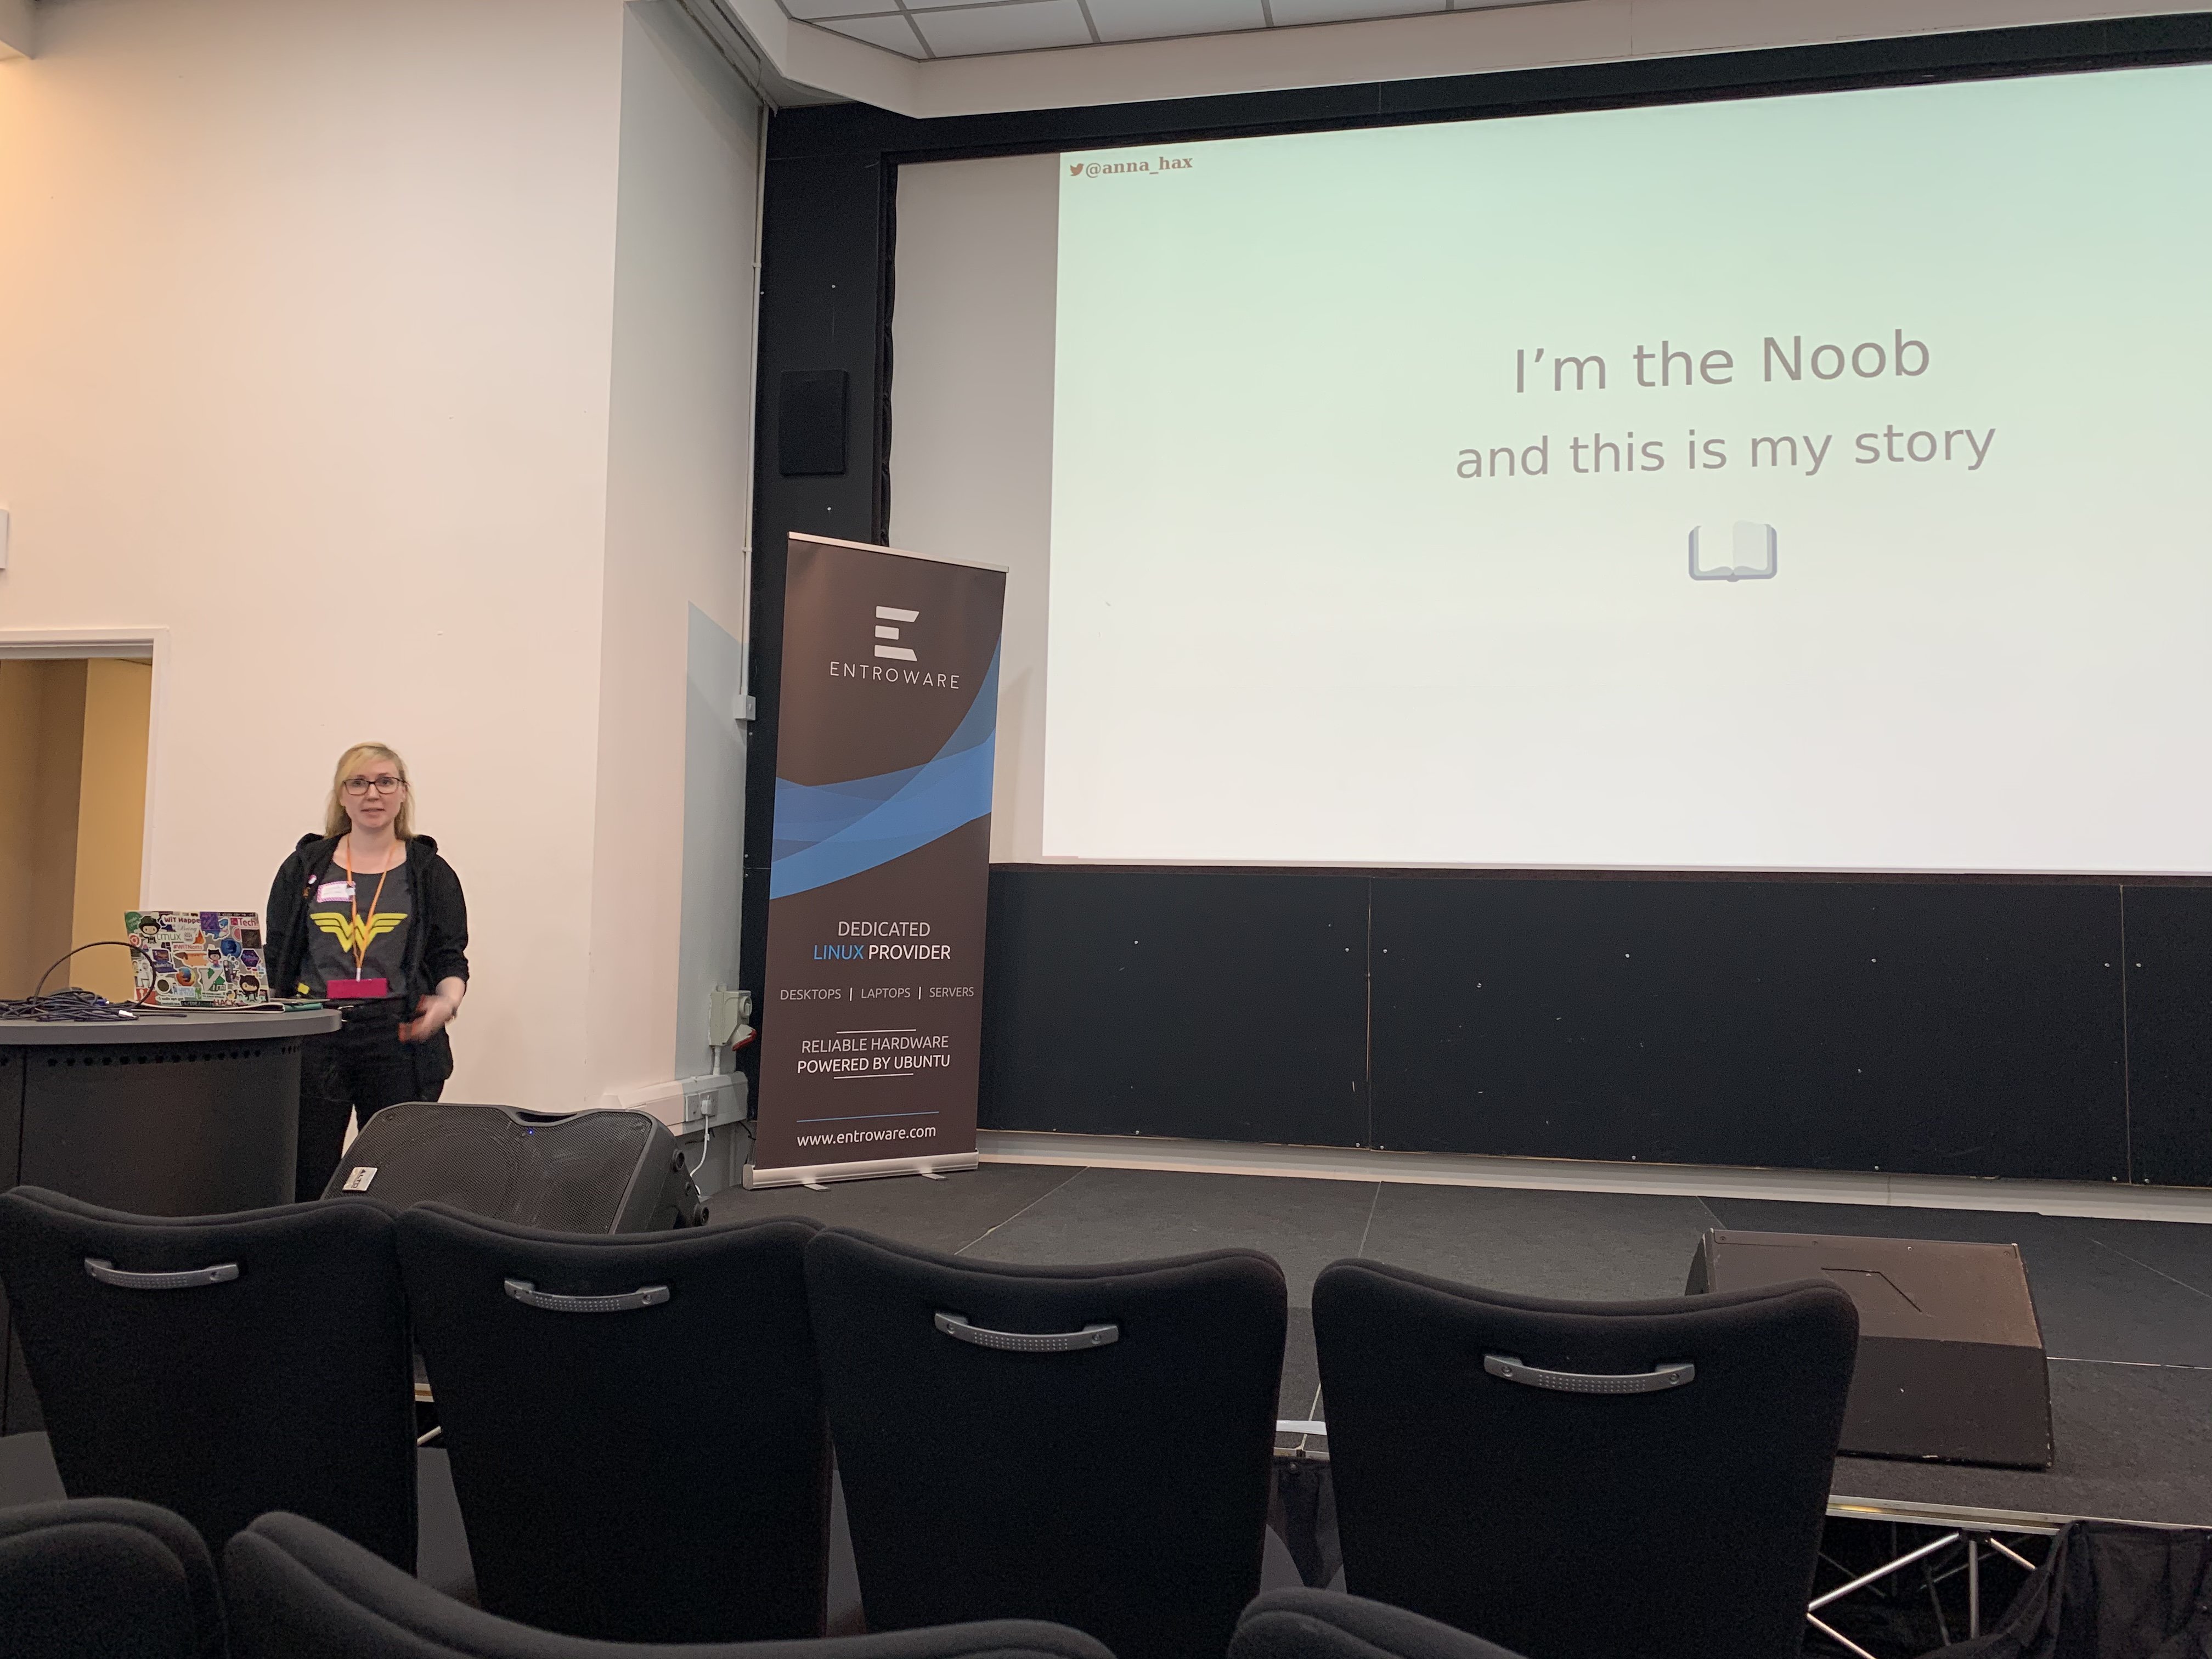 Photo of me at a lectern presenting the talk in front of slide saying 'I'm the noob and this is my story'.